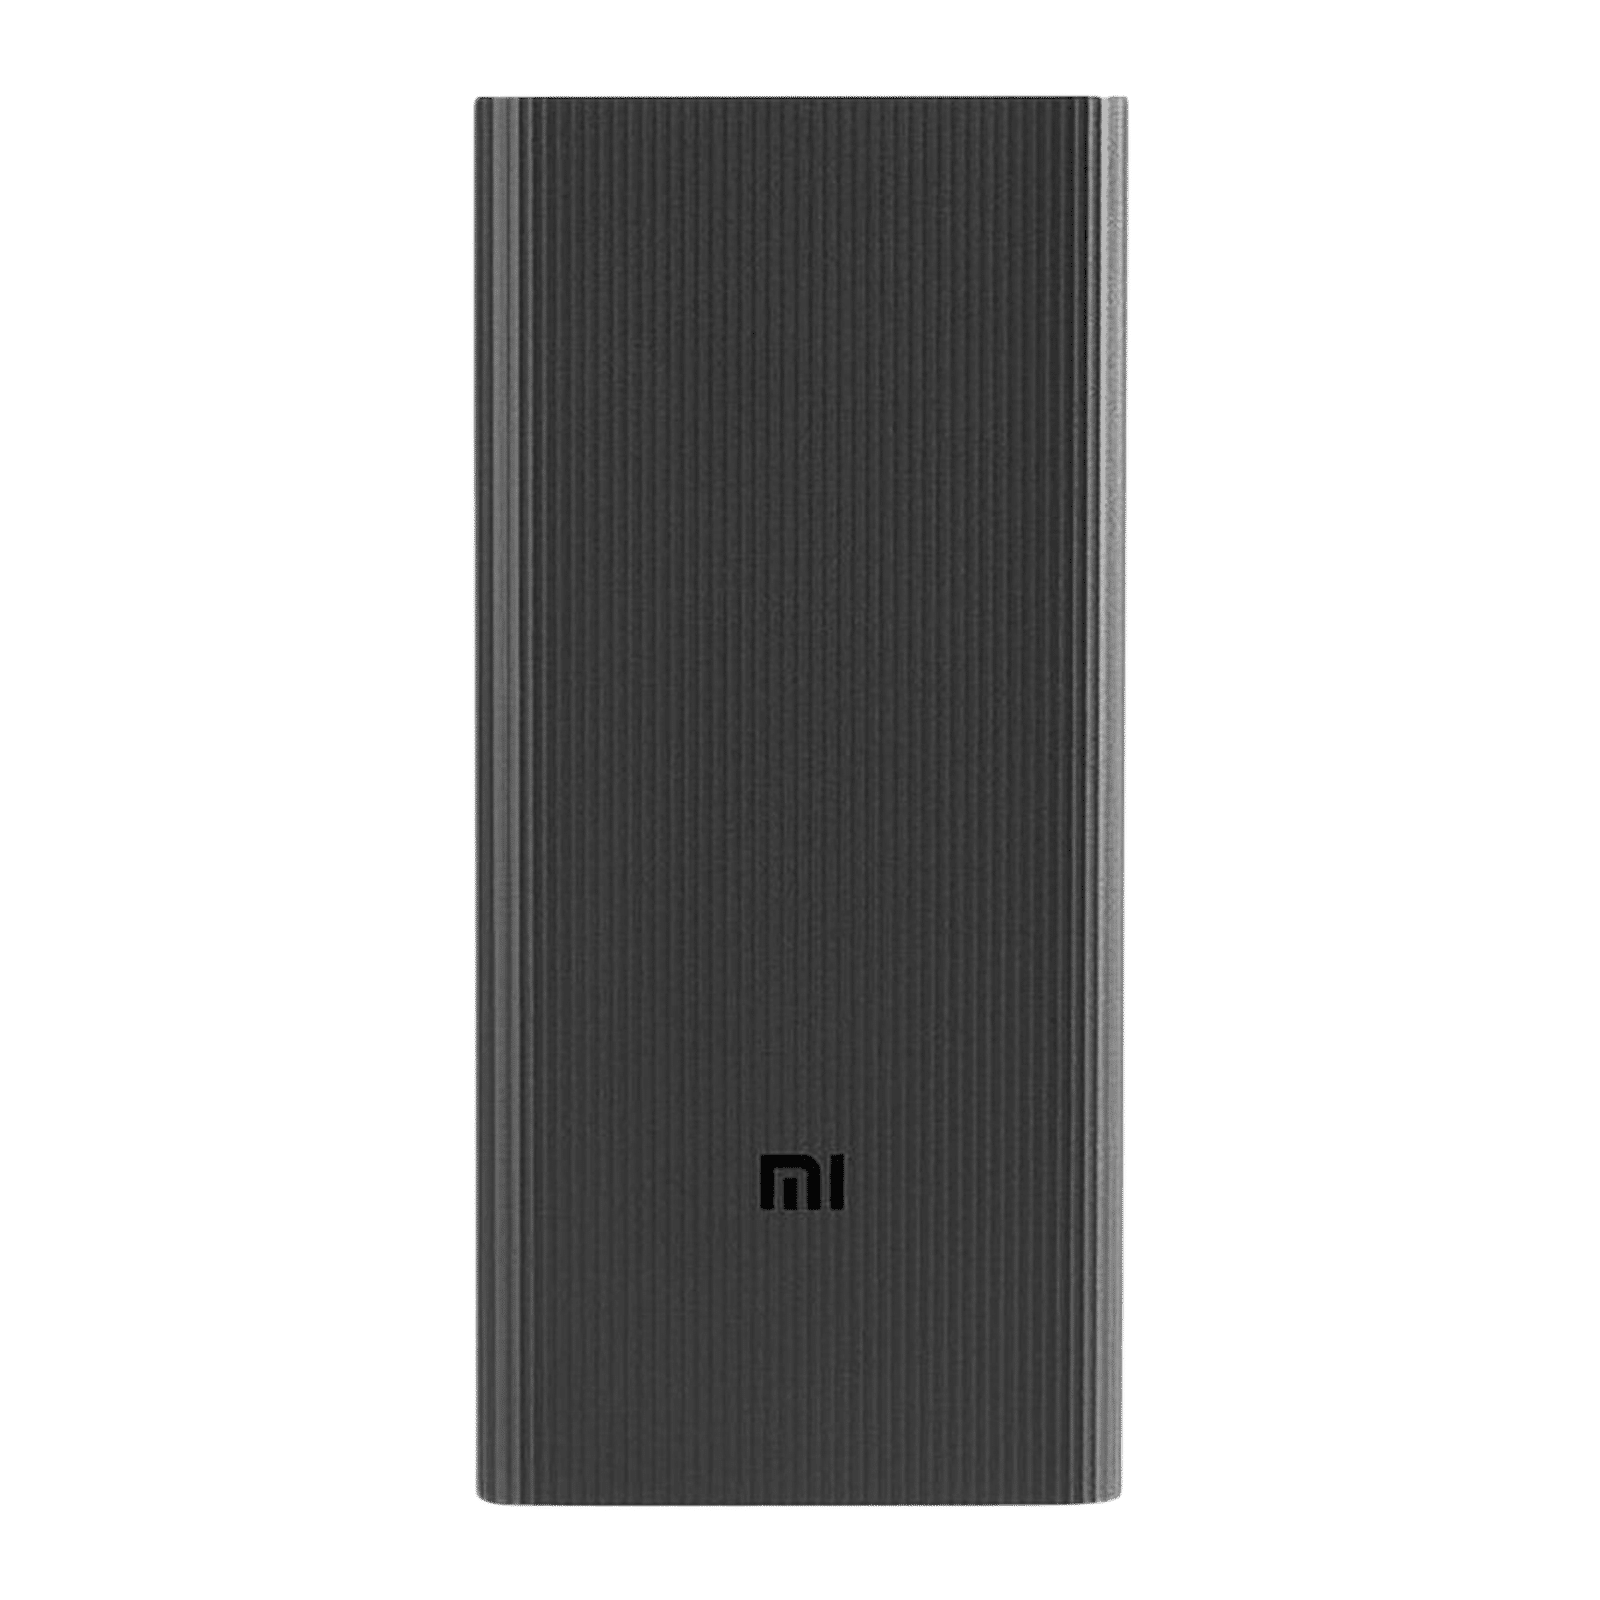 MI Power Bank 3i 20000mAh Lithium Polymer 18W Fast Power Delivery Charging, Input- Type C, Micro USB, Triple Output